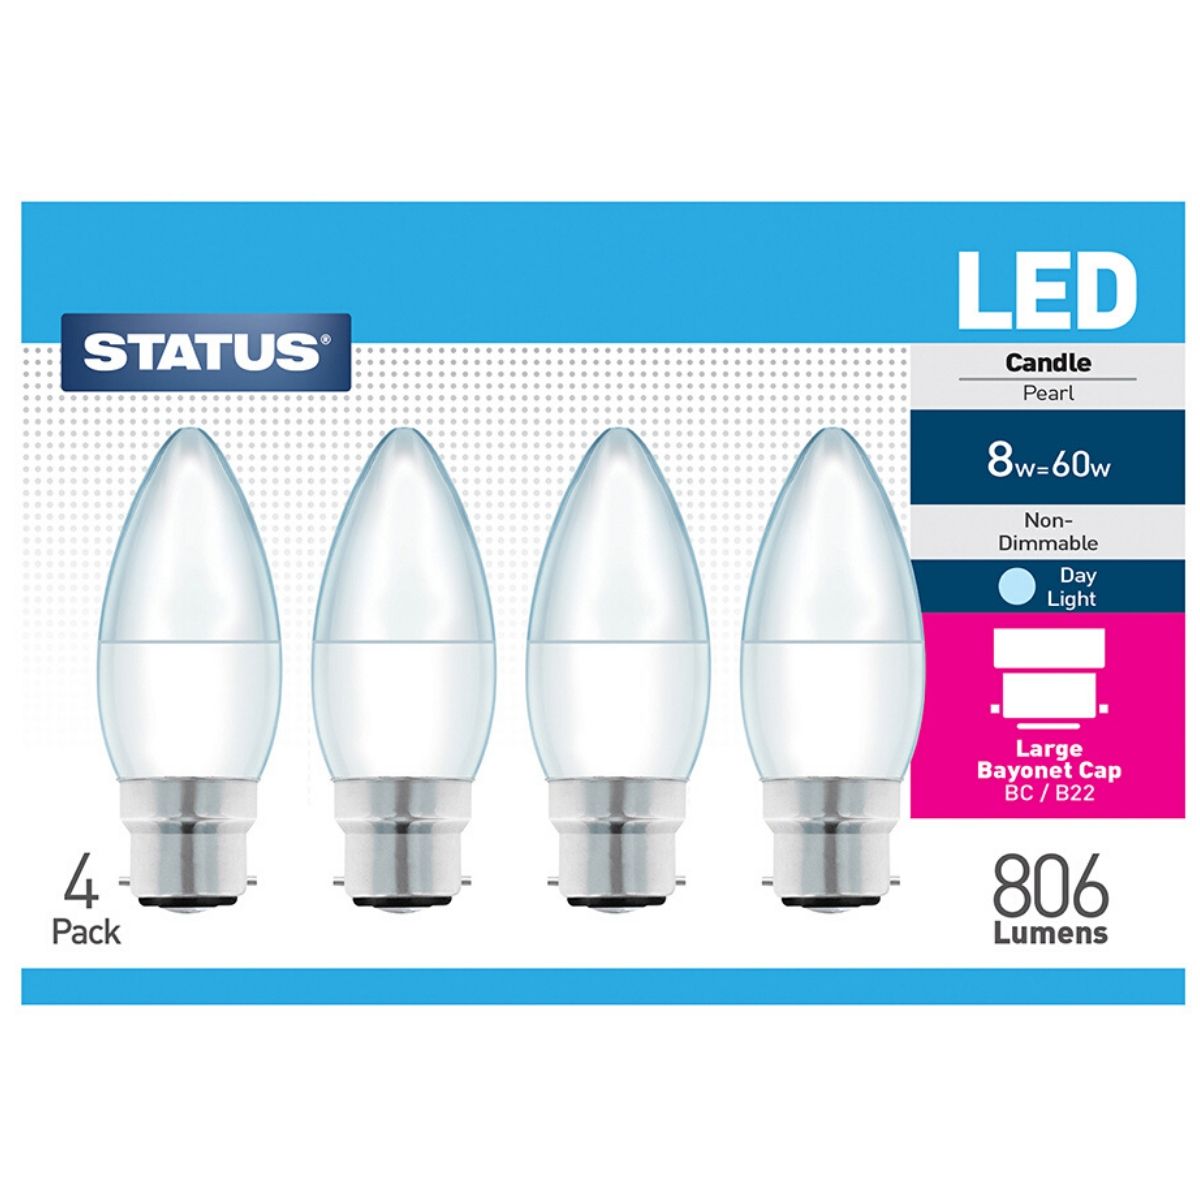 View 4 x Status 8w LED Candle Bulbs 806 Lumens Cool White B22 information